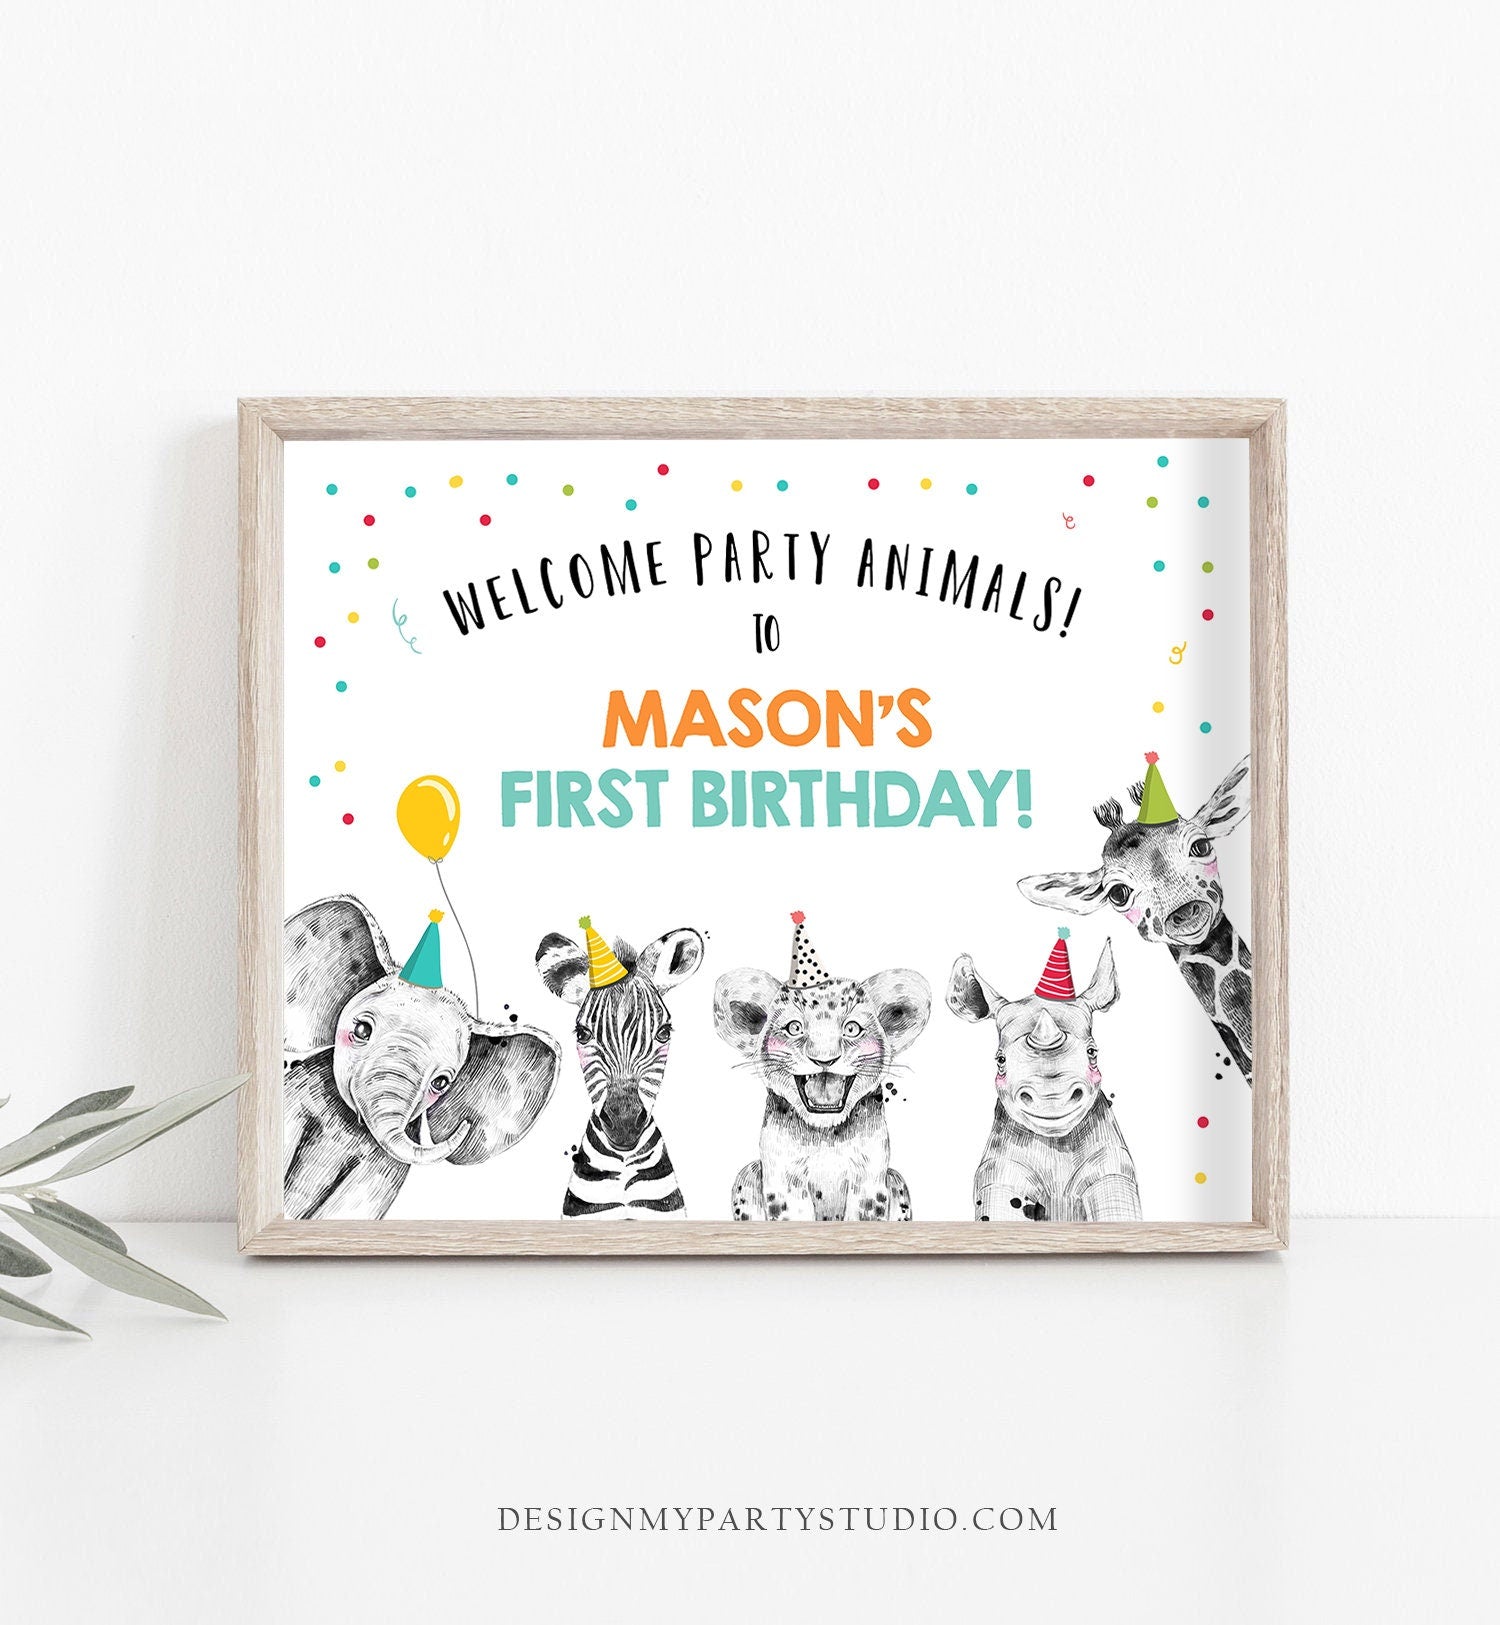 Editable Party Animals Welcome Sign Party Animal Sign Zoo Safari Welcome Jungle Sign Birthday Animals Boy Template PRINTABLE Corjl 0390